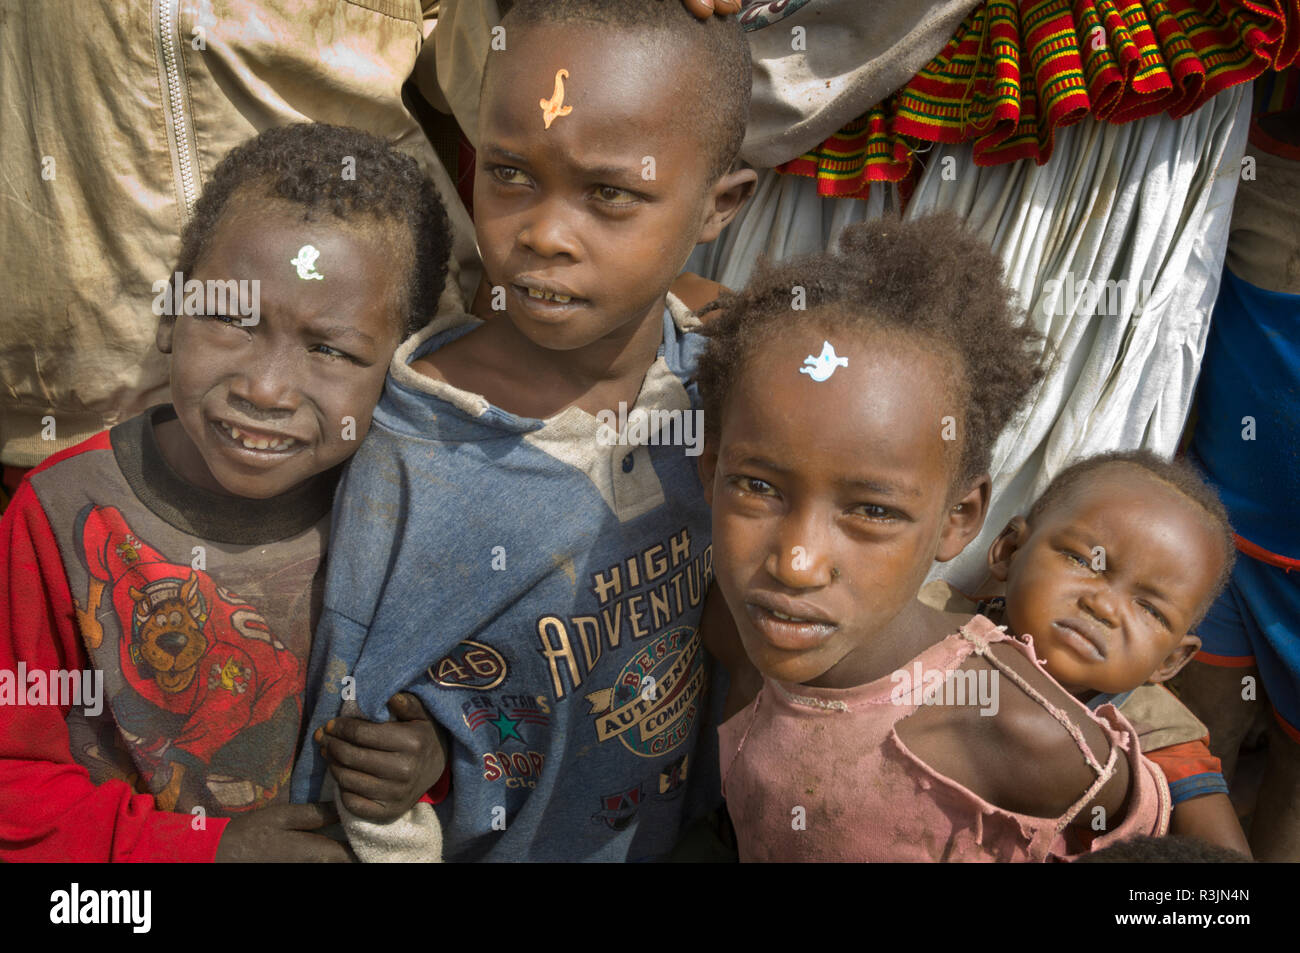 Africa, Ethiopia, Omo region. Children with stickers on their foreheads in the Konso tribe village of Busso. Stock Photo